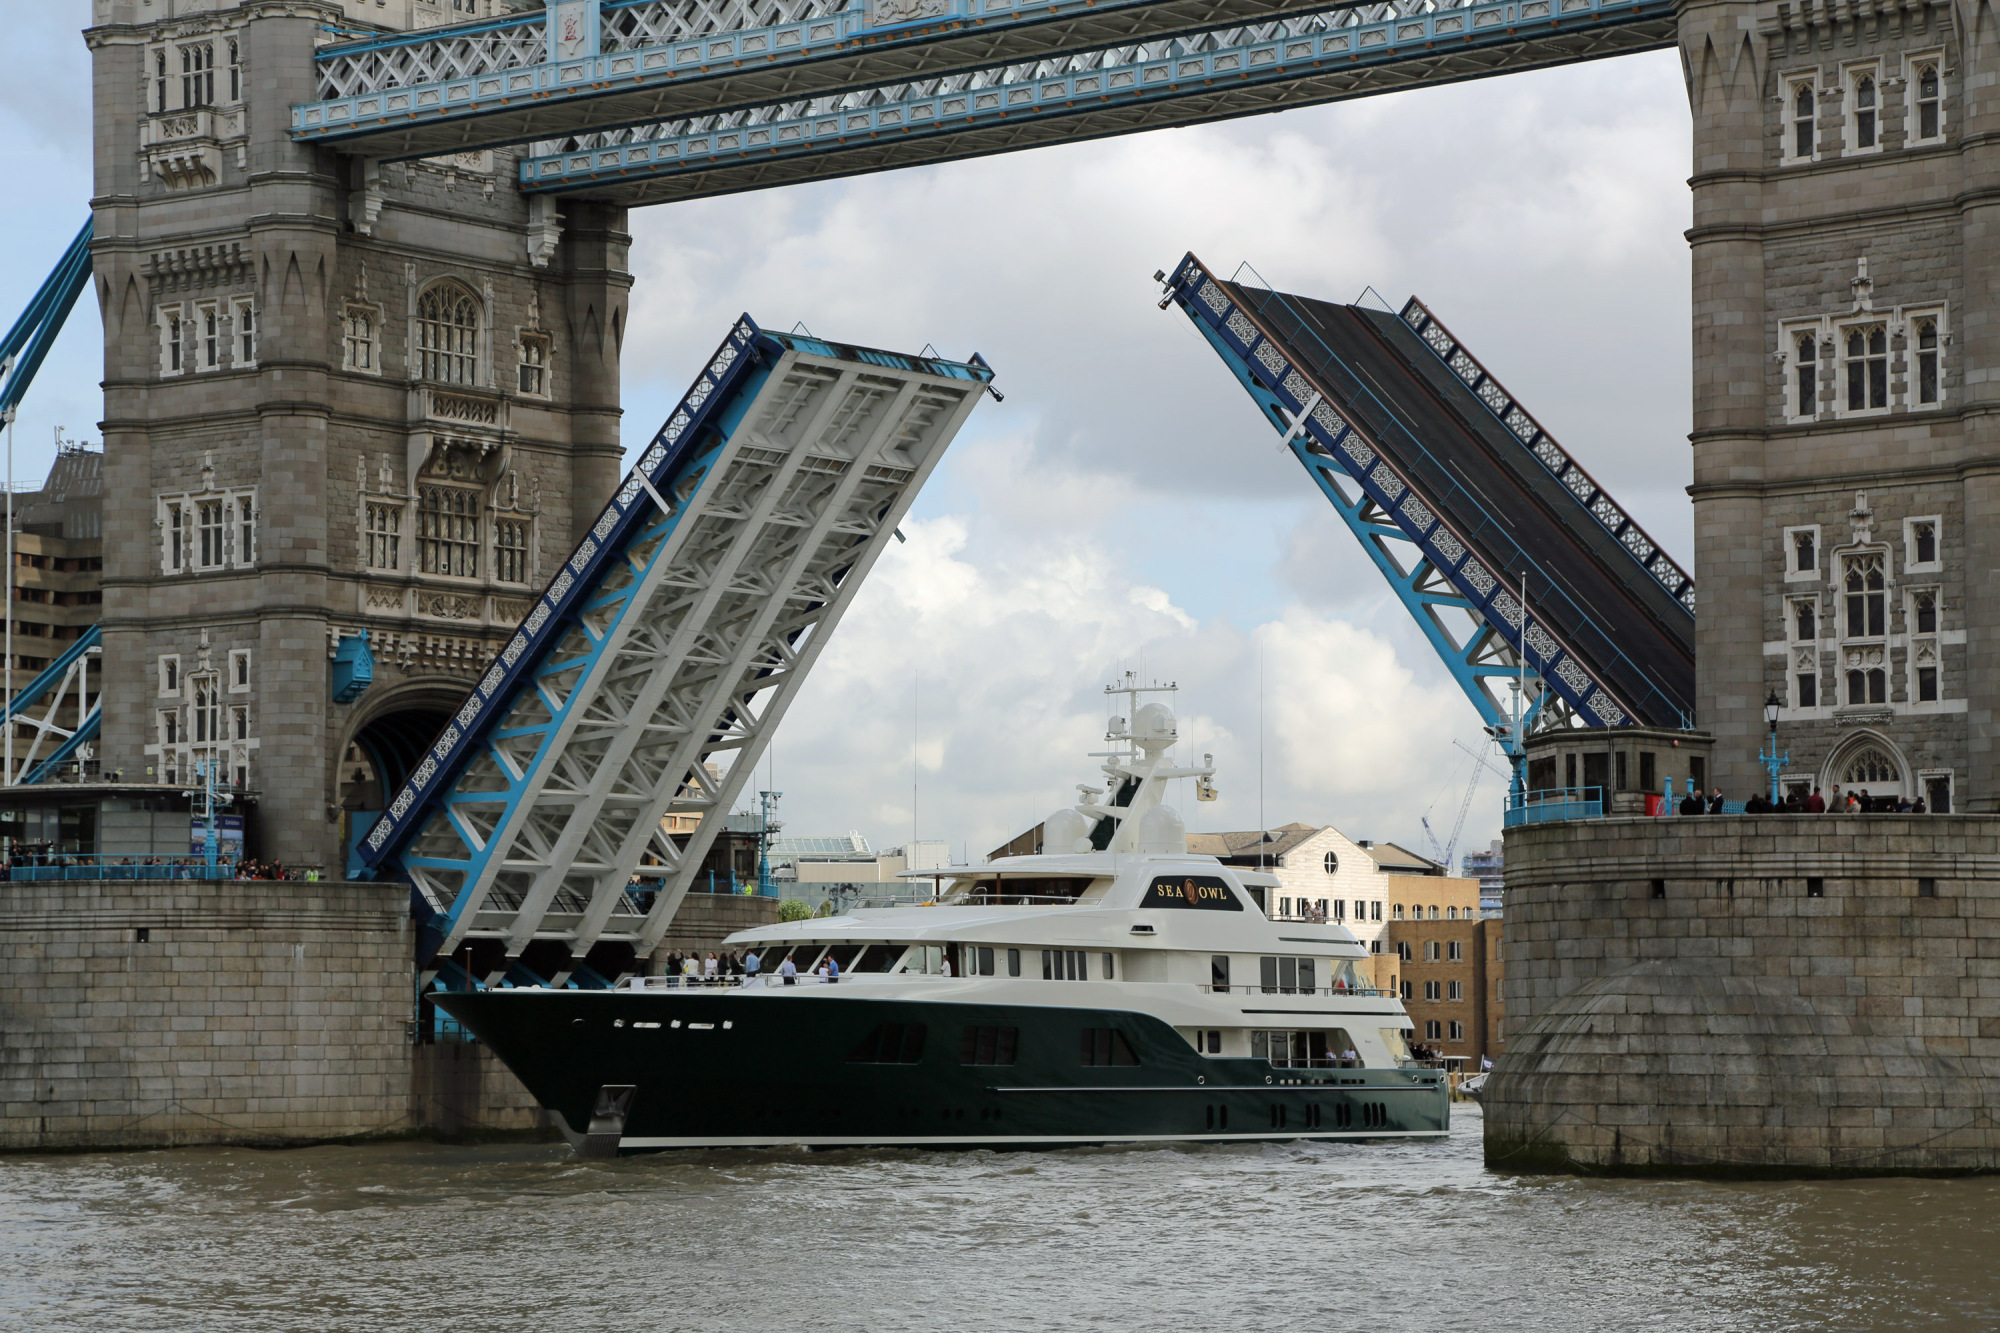 US hedge fund manager Robert Mercer's new superyacht Sea Owl on the River Thames, London, Britain - 17 Oct 2013